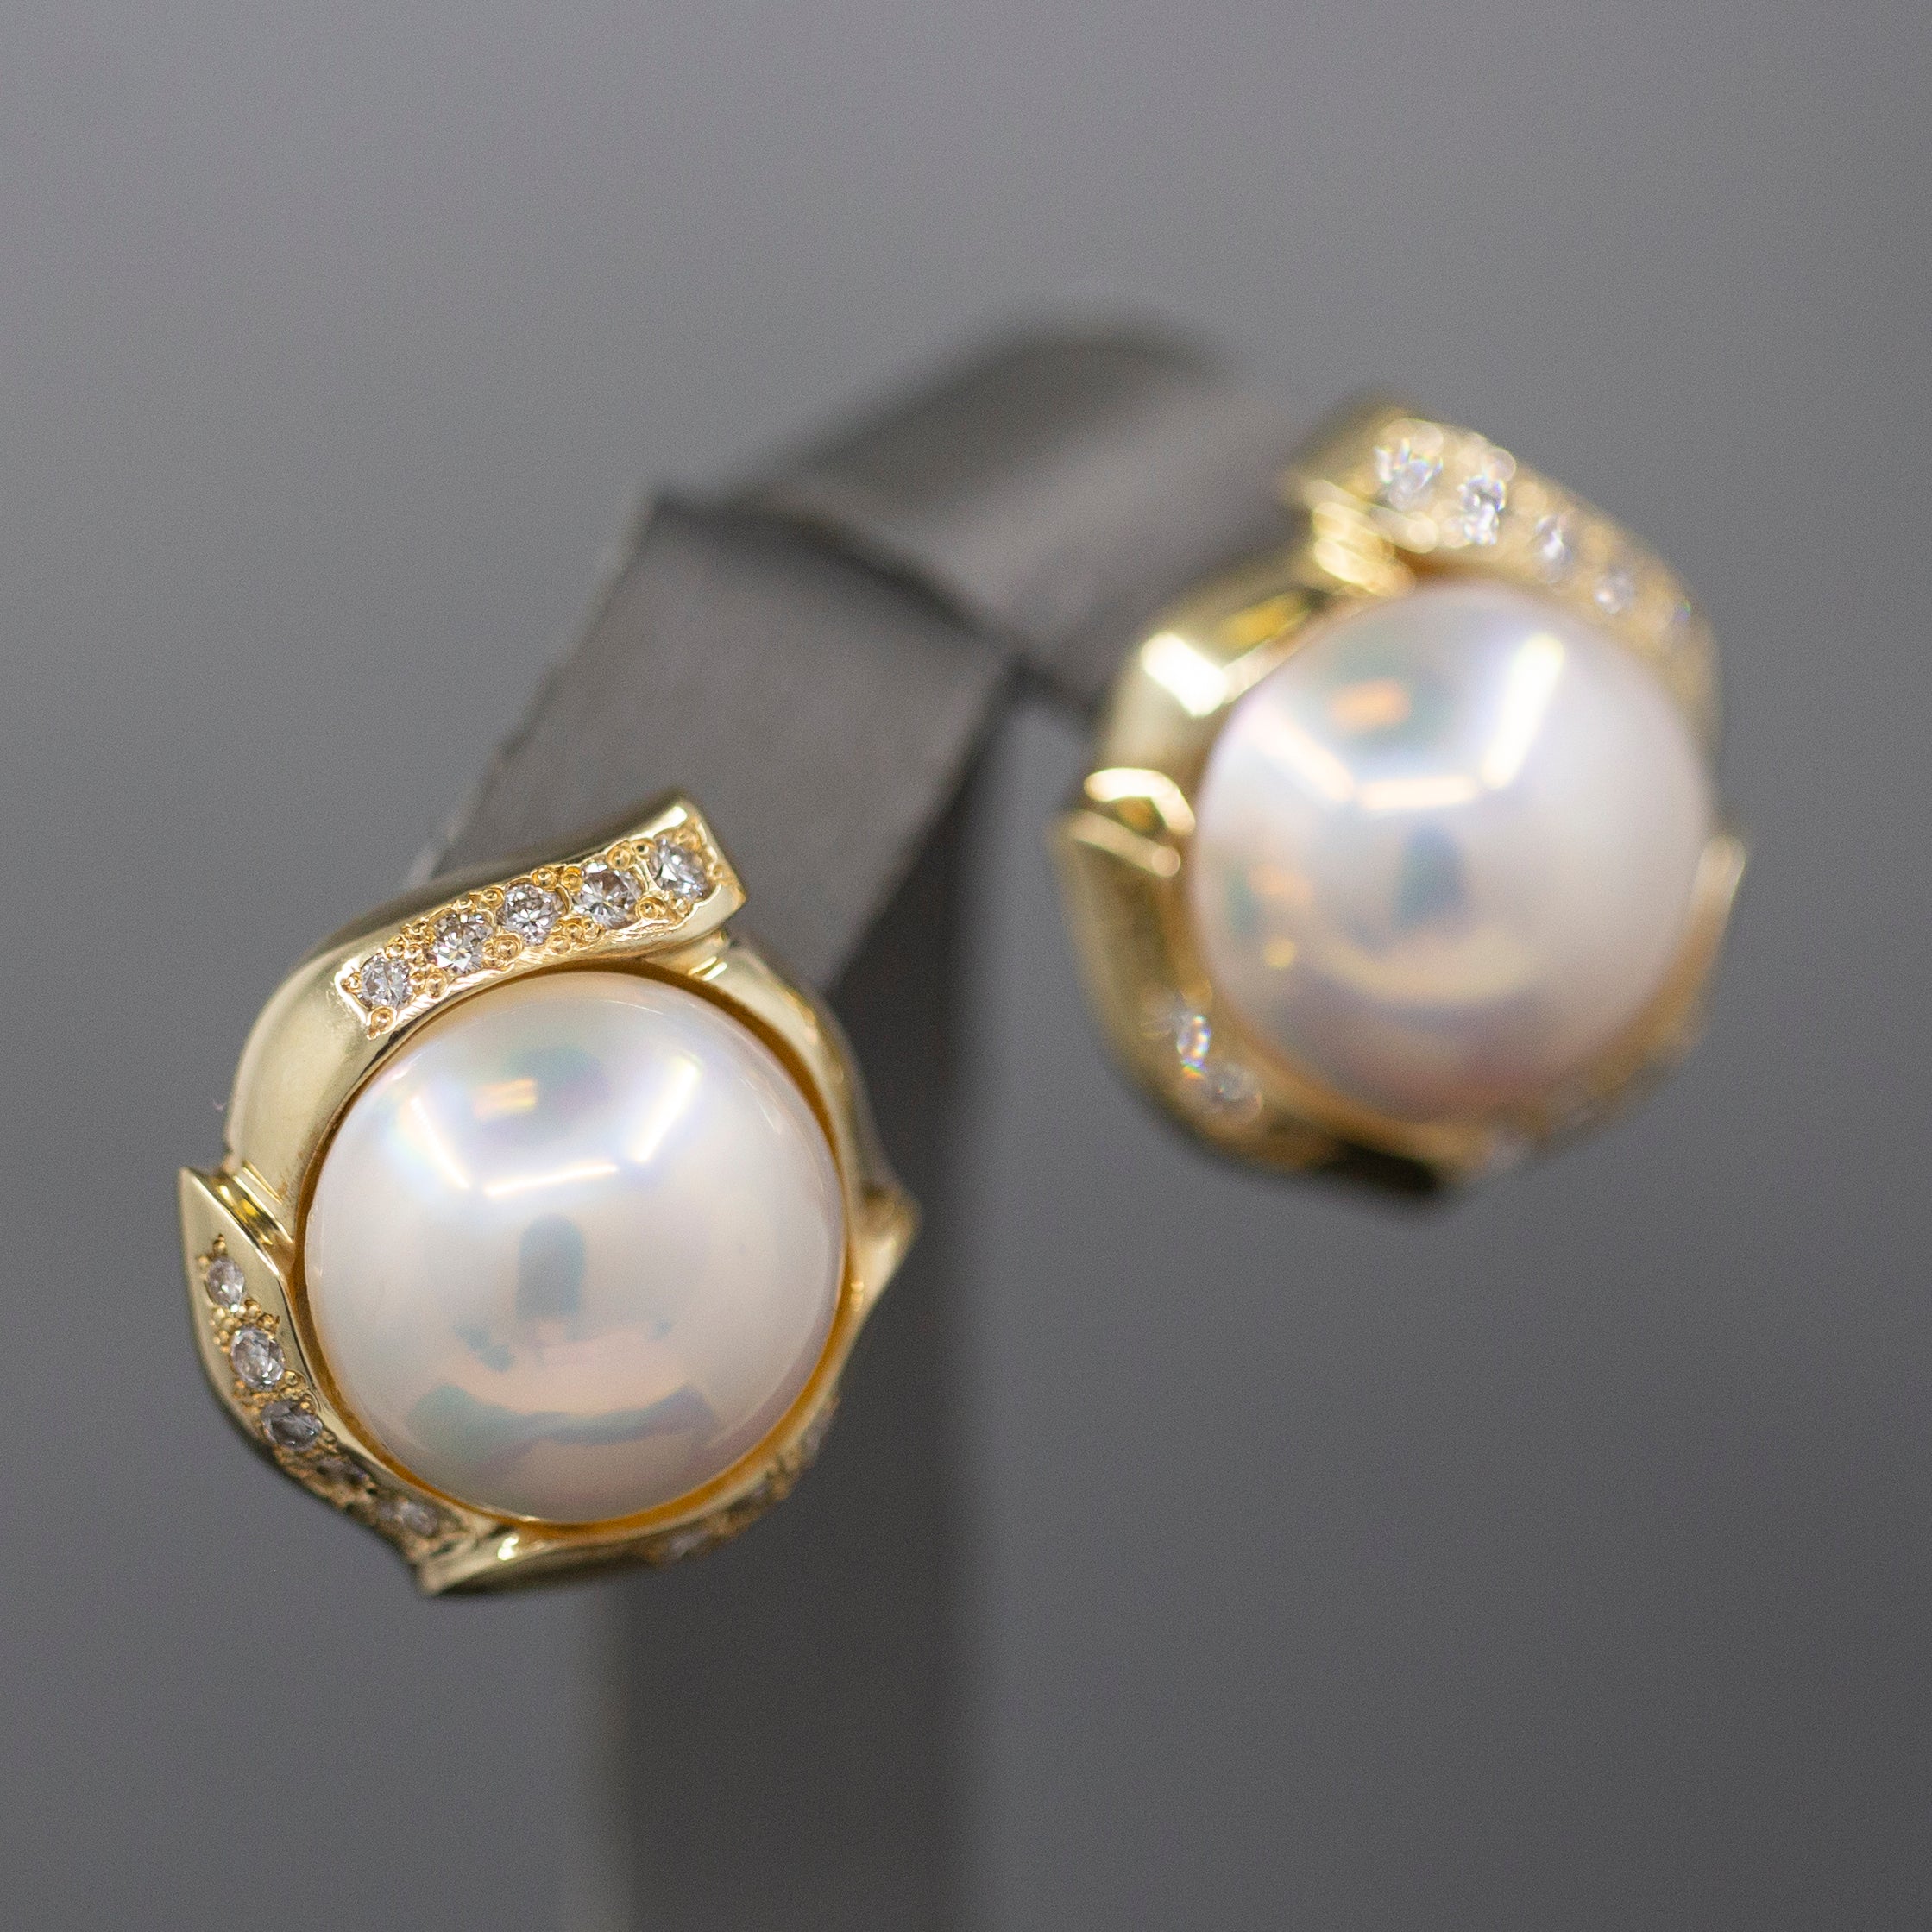 Lustrous Mabe' Pearl and Diamond Omega Back Earrings in 14k Yellow Gold